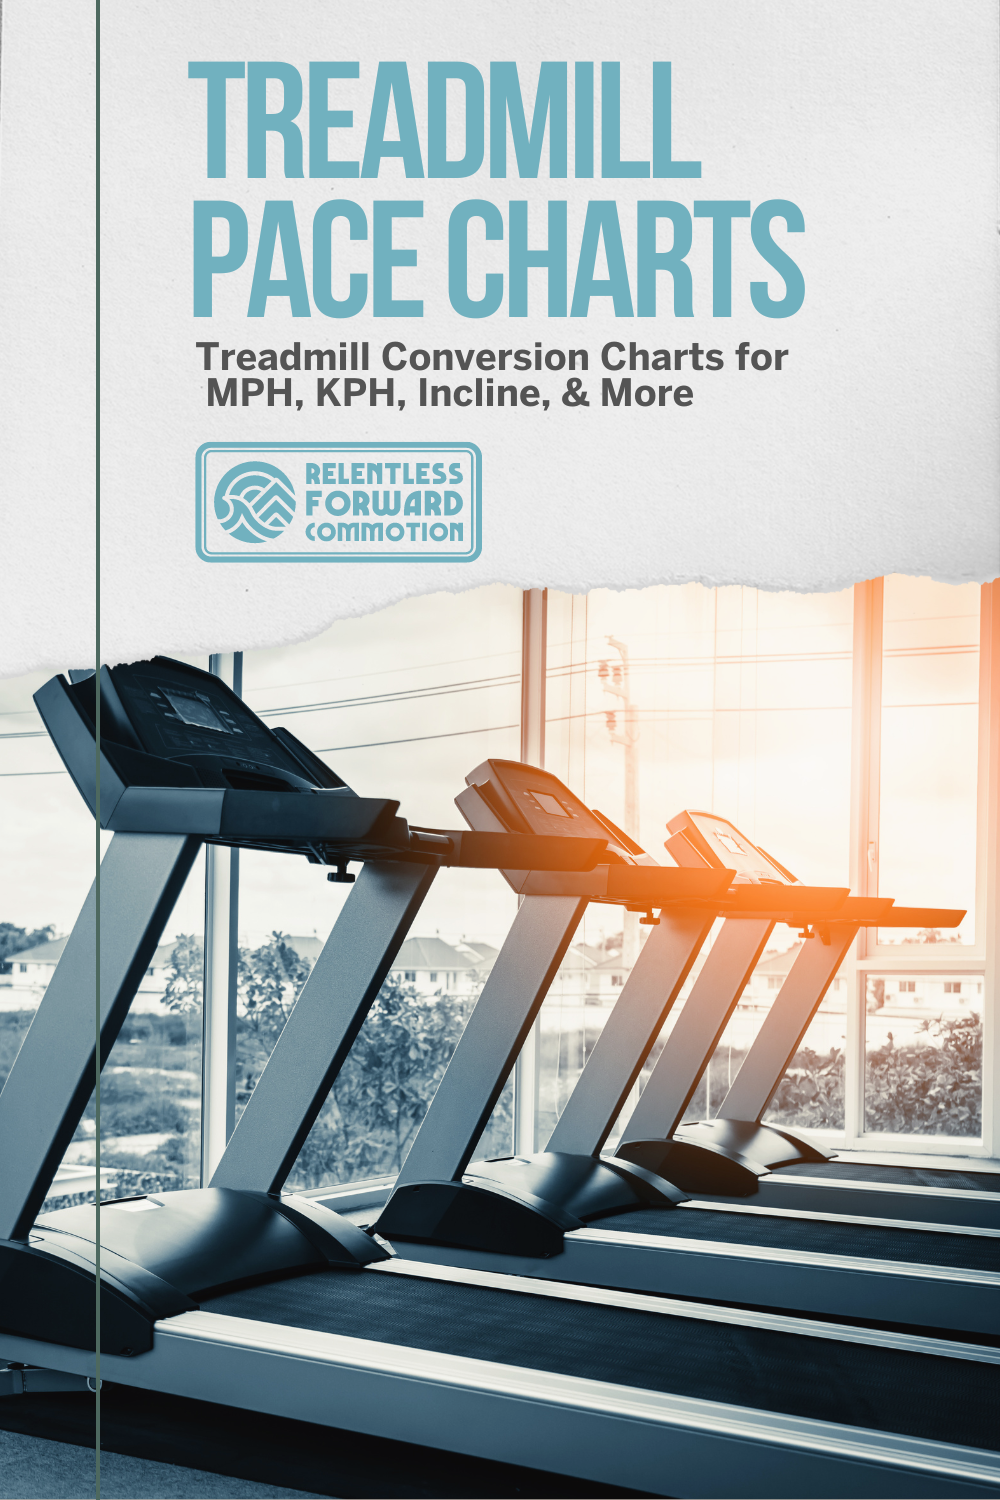 Treadmill Pace Chart: Treadmill Conversions for MPH, KPH, Incline, & More -  RELENTLESS FORWARD COMMOTION